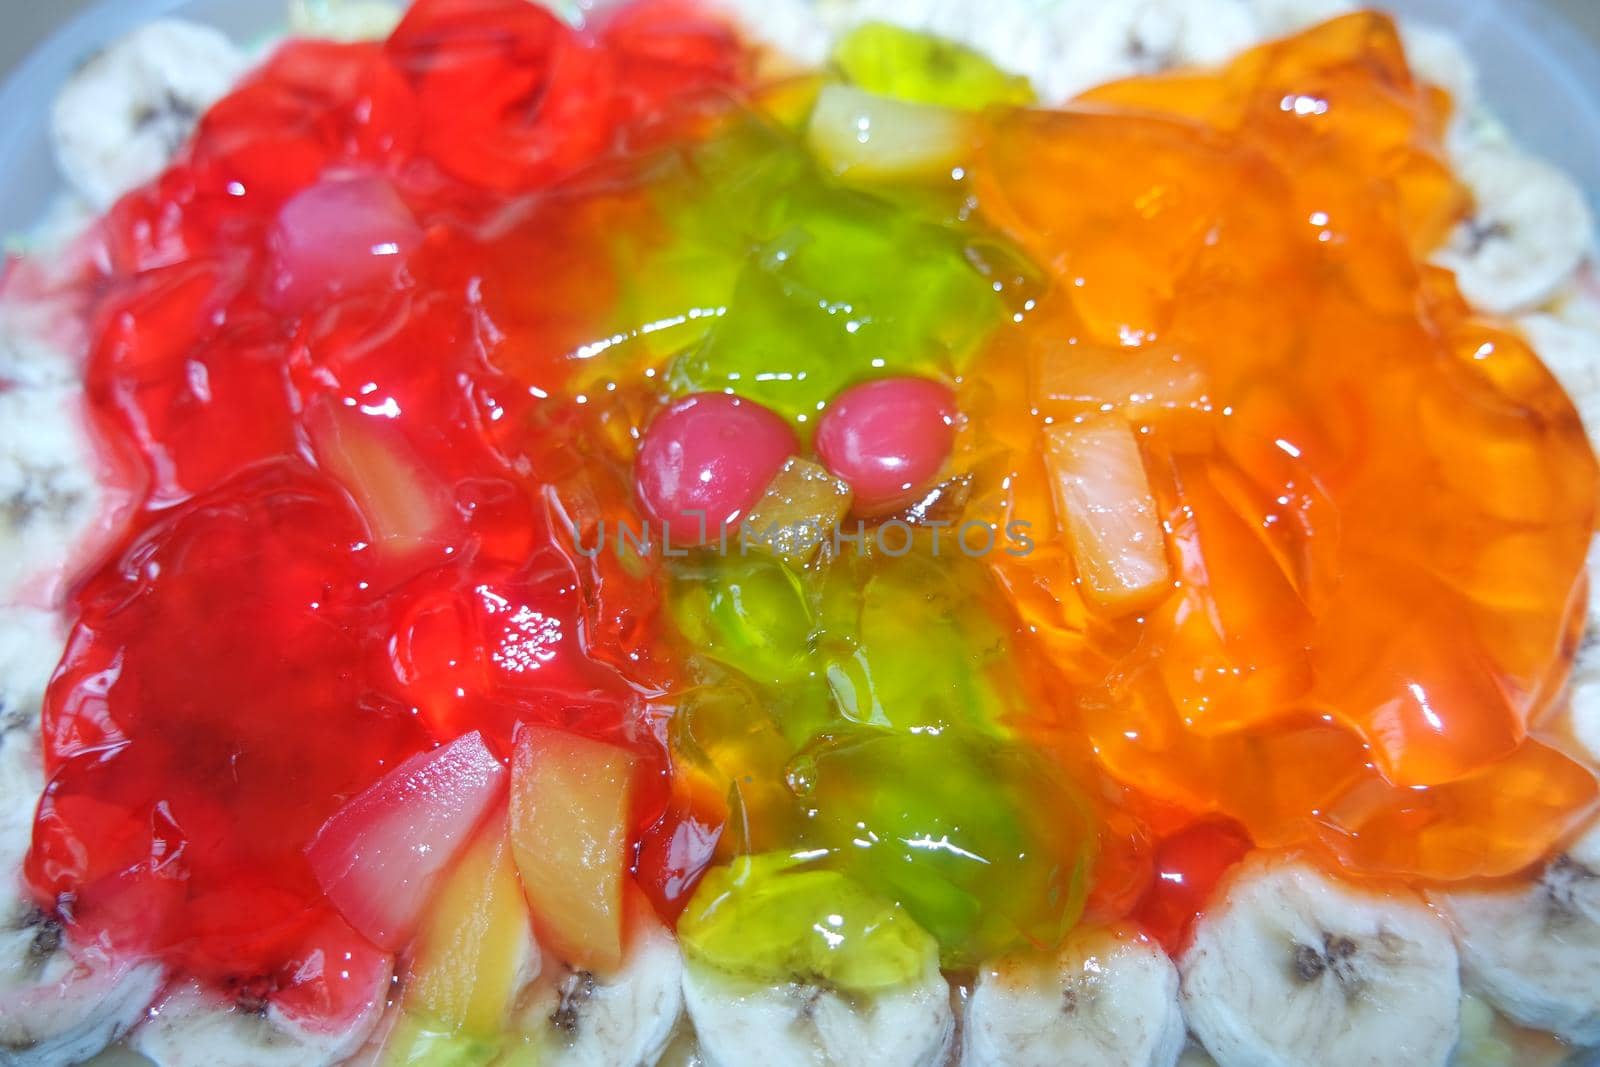 Creamy custard jelly sweet dish with different slices layered on surface by Photochowk